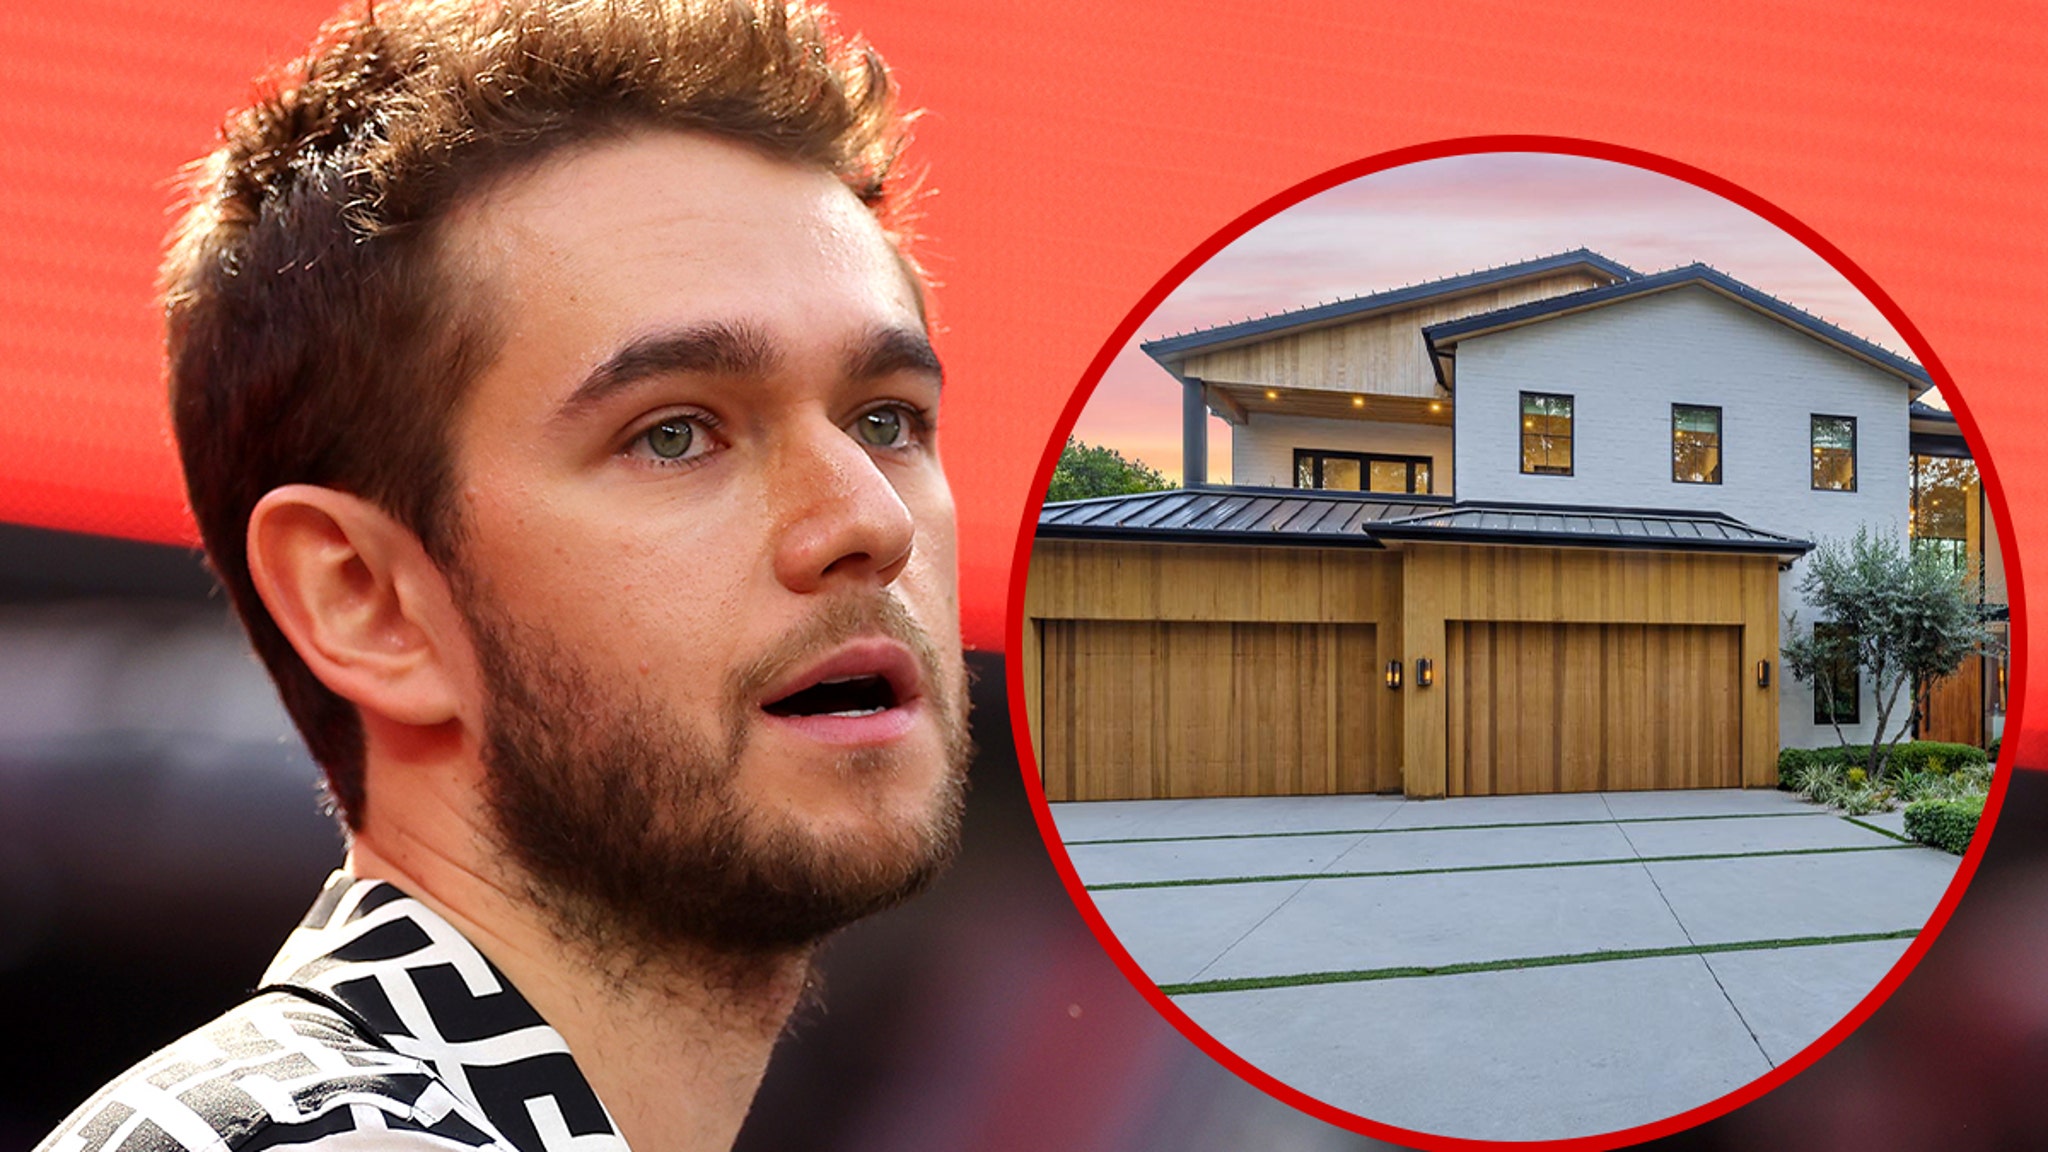 Zedd seeks protection from a woman he believes is impersonating him